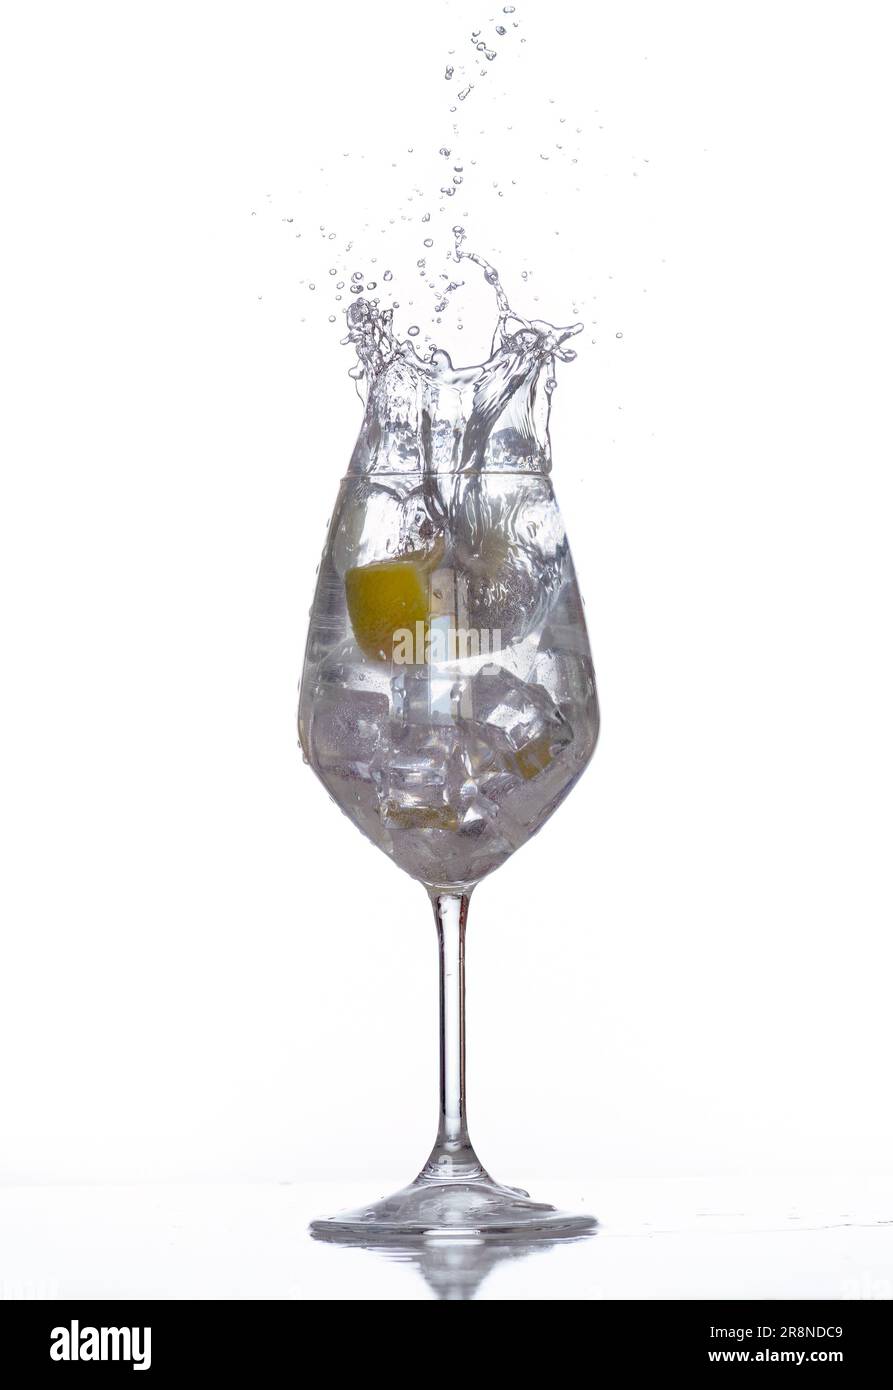 Splash photography with a lemon inside water and ice. Stock Photo